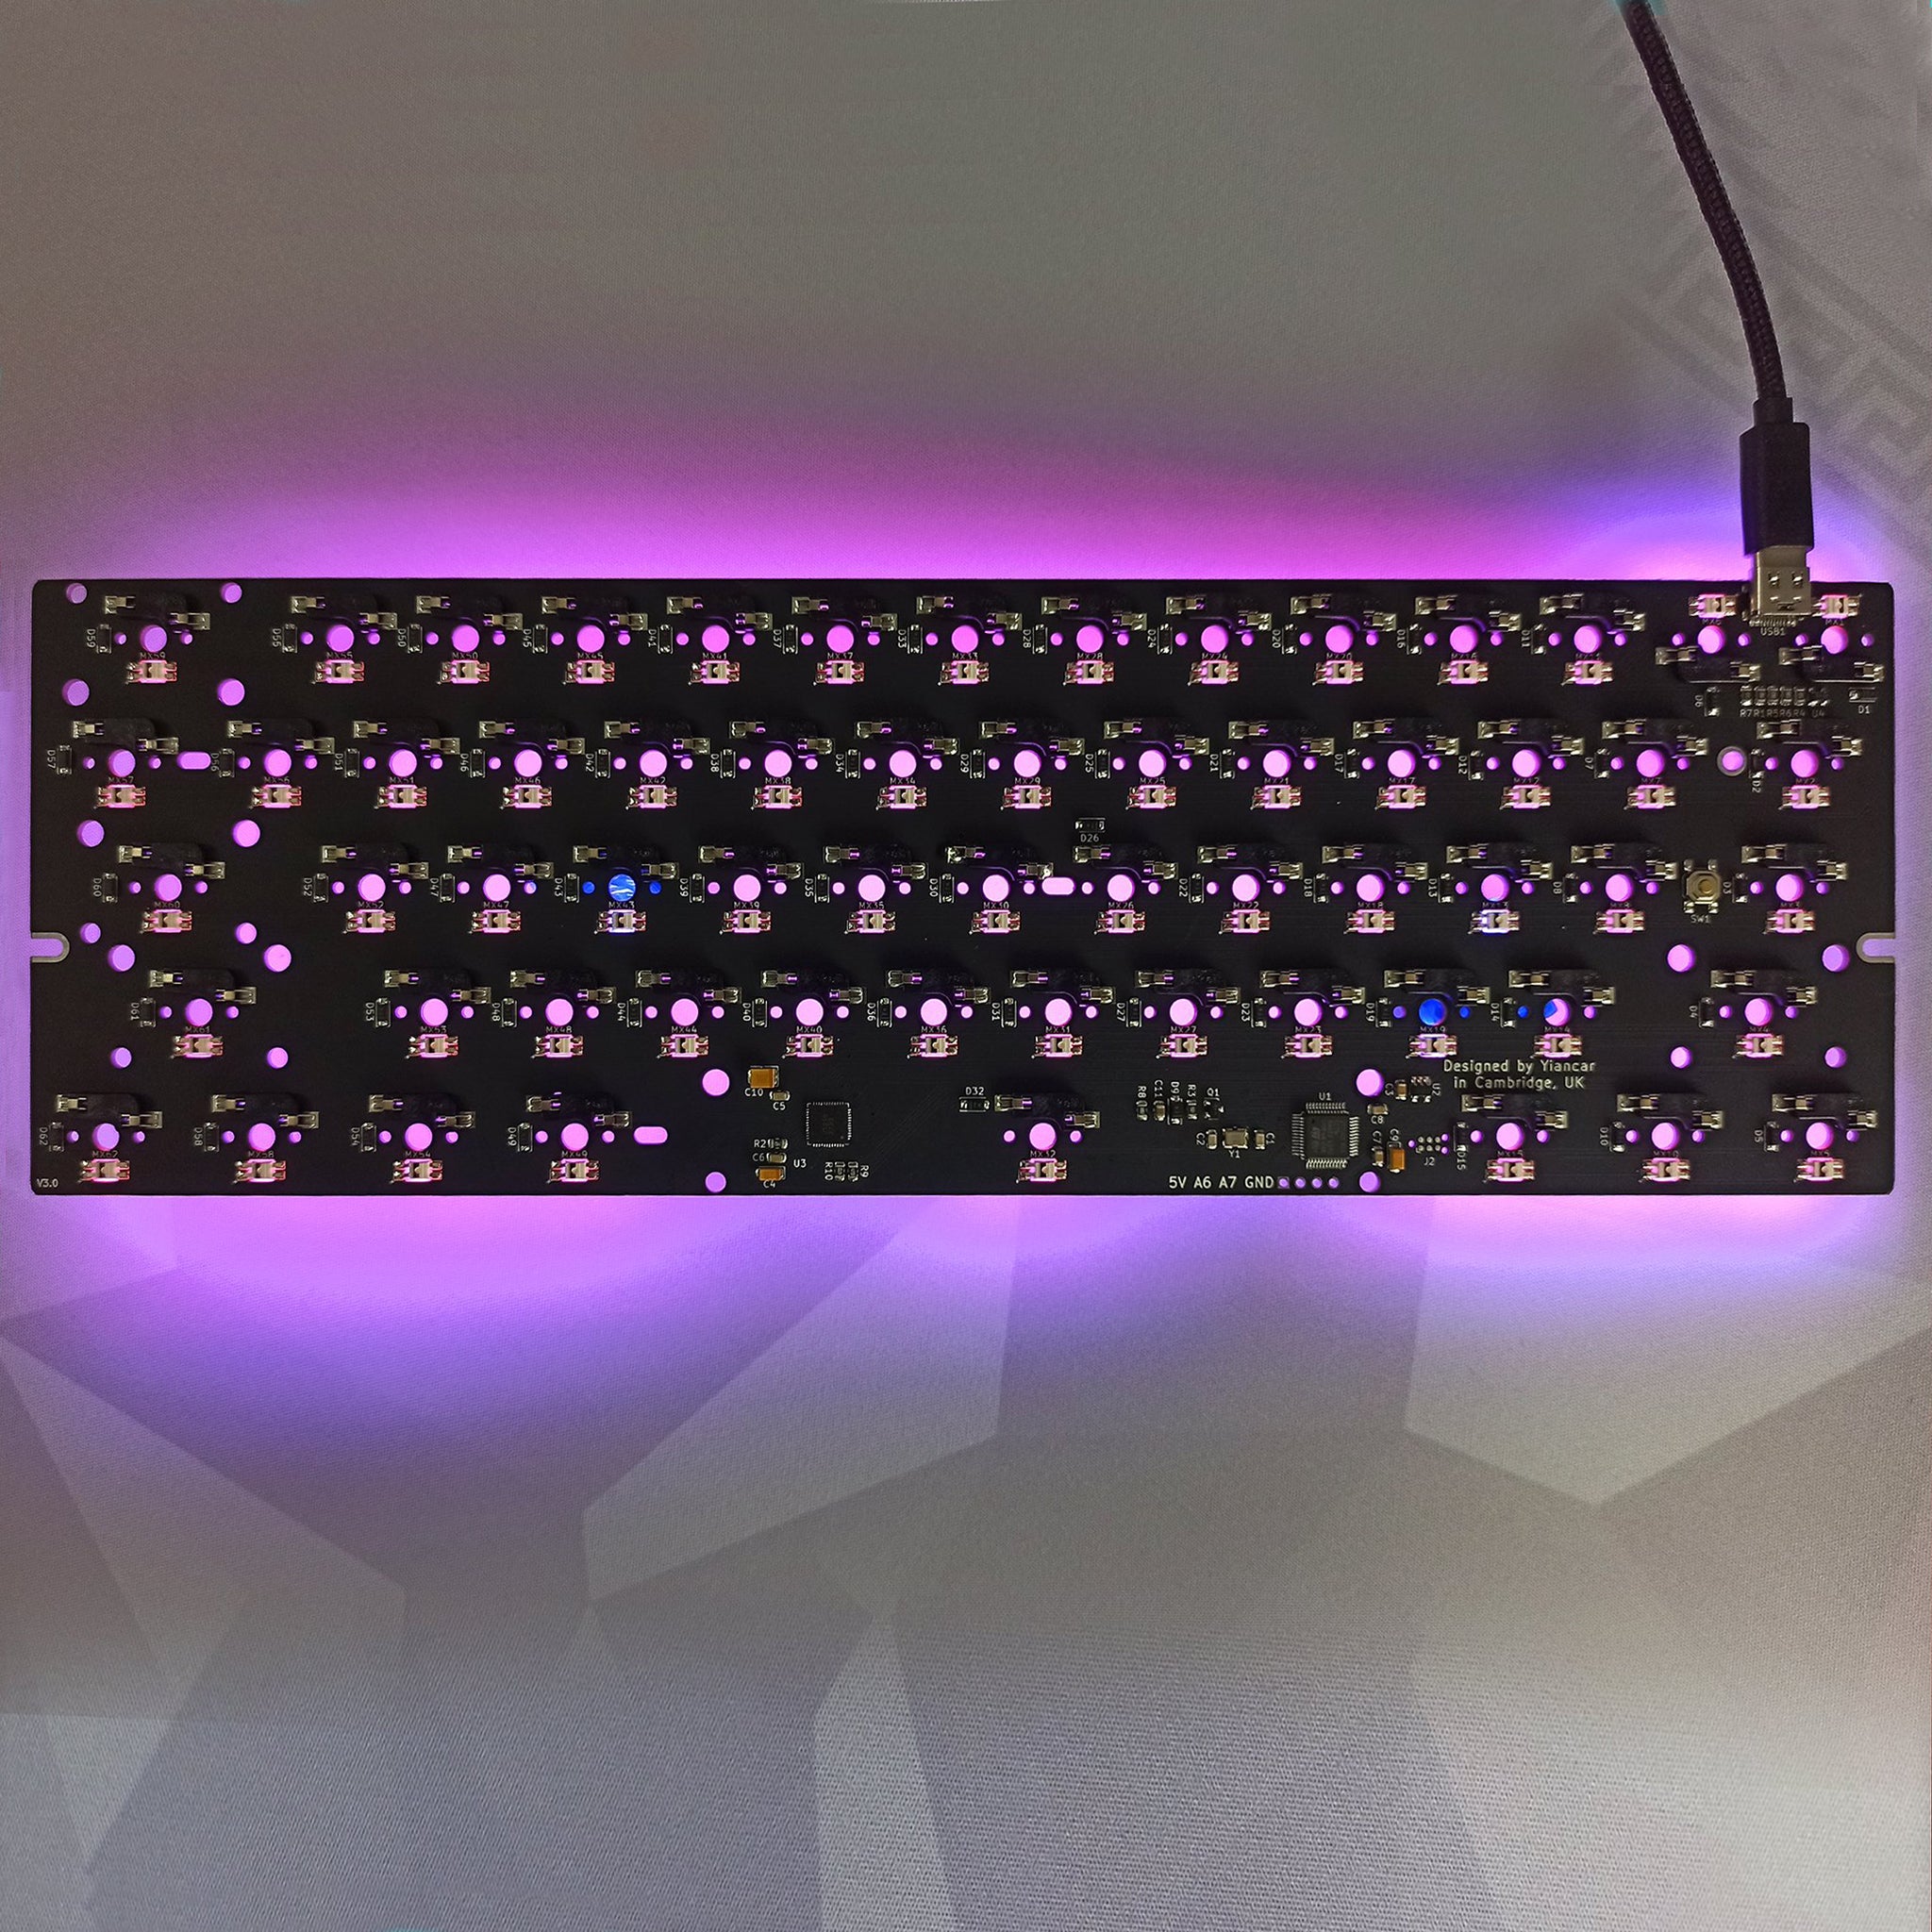 The Pink Panther RGB lightning. Swappable HS60 60% ANSI PCB board. With RGB lightning. With type C connector and 6.25u Space bar